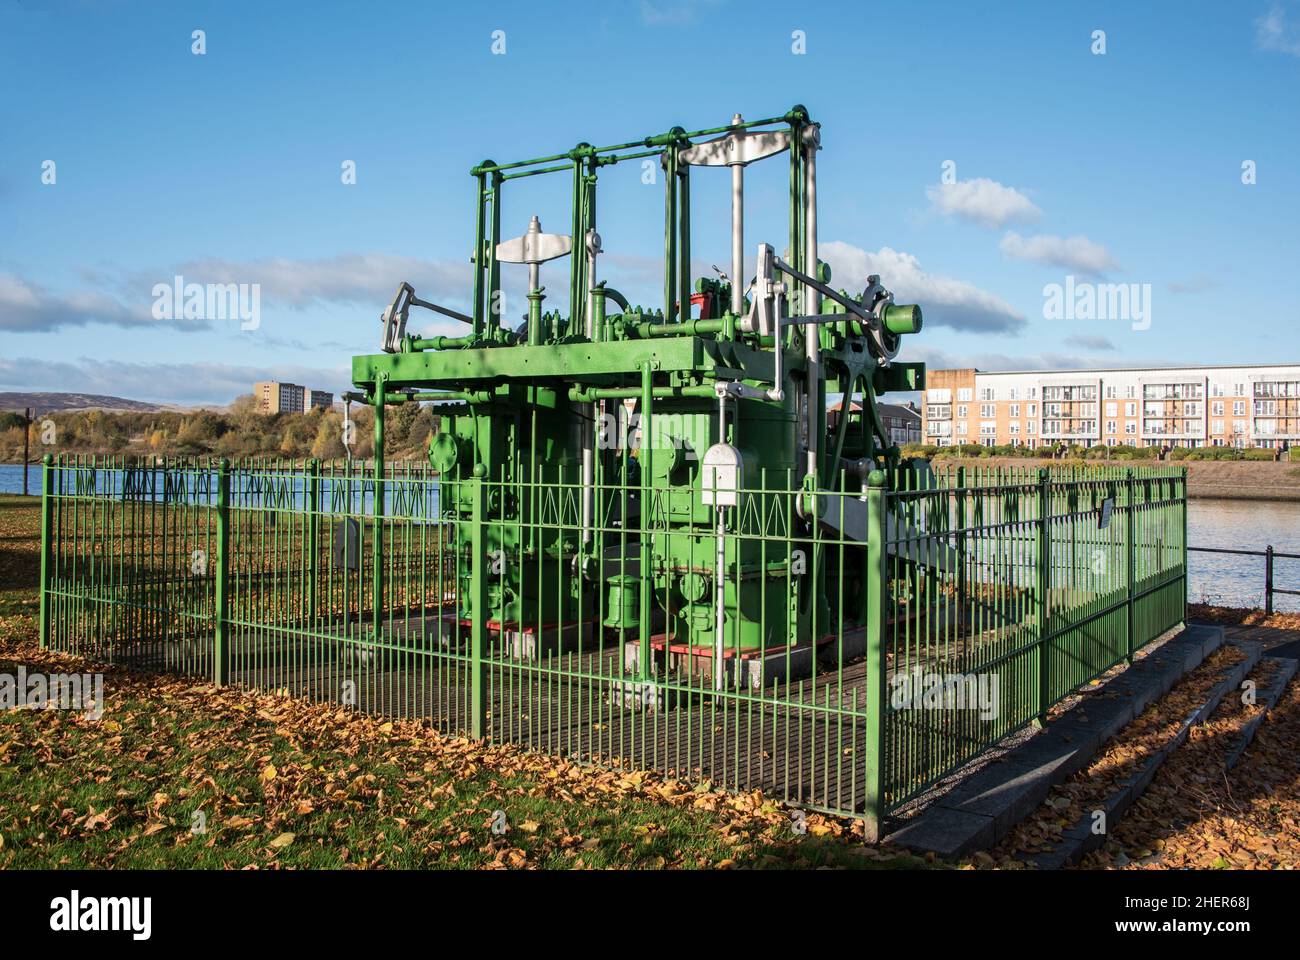 Engines of the Tug 'CLYDE' at River Clyde, Renfrew Scotland. Stock Photo